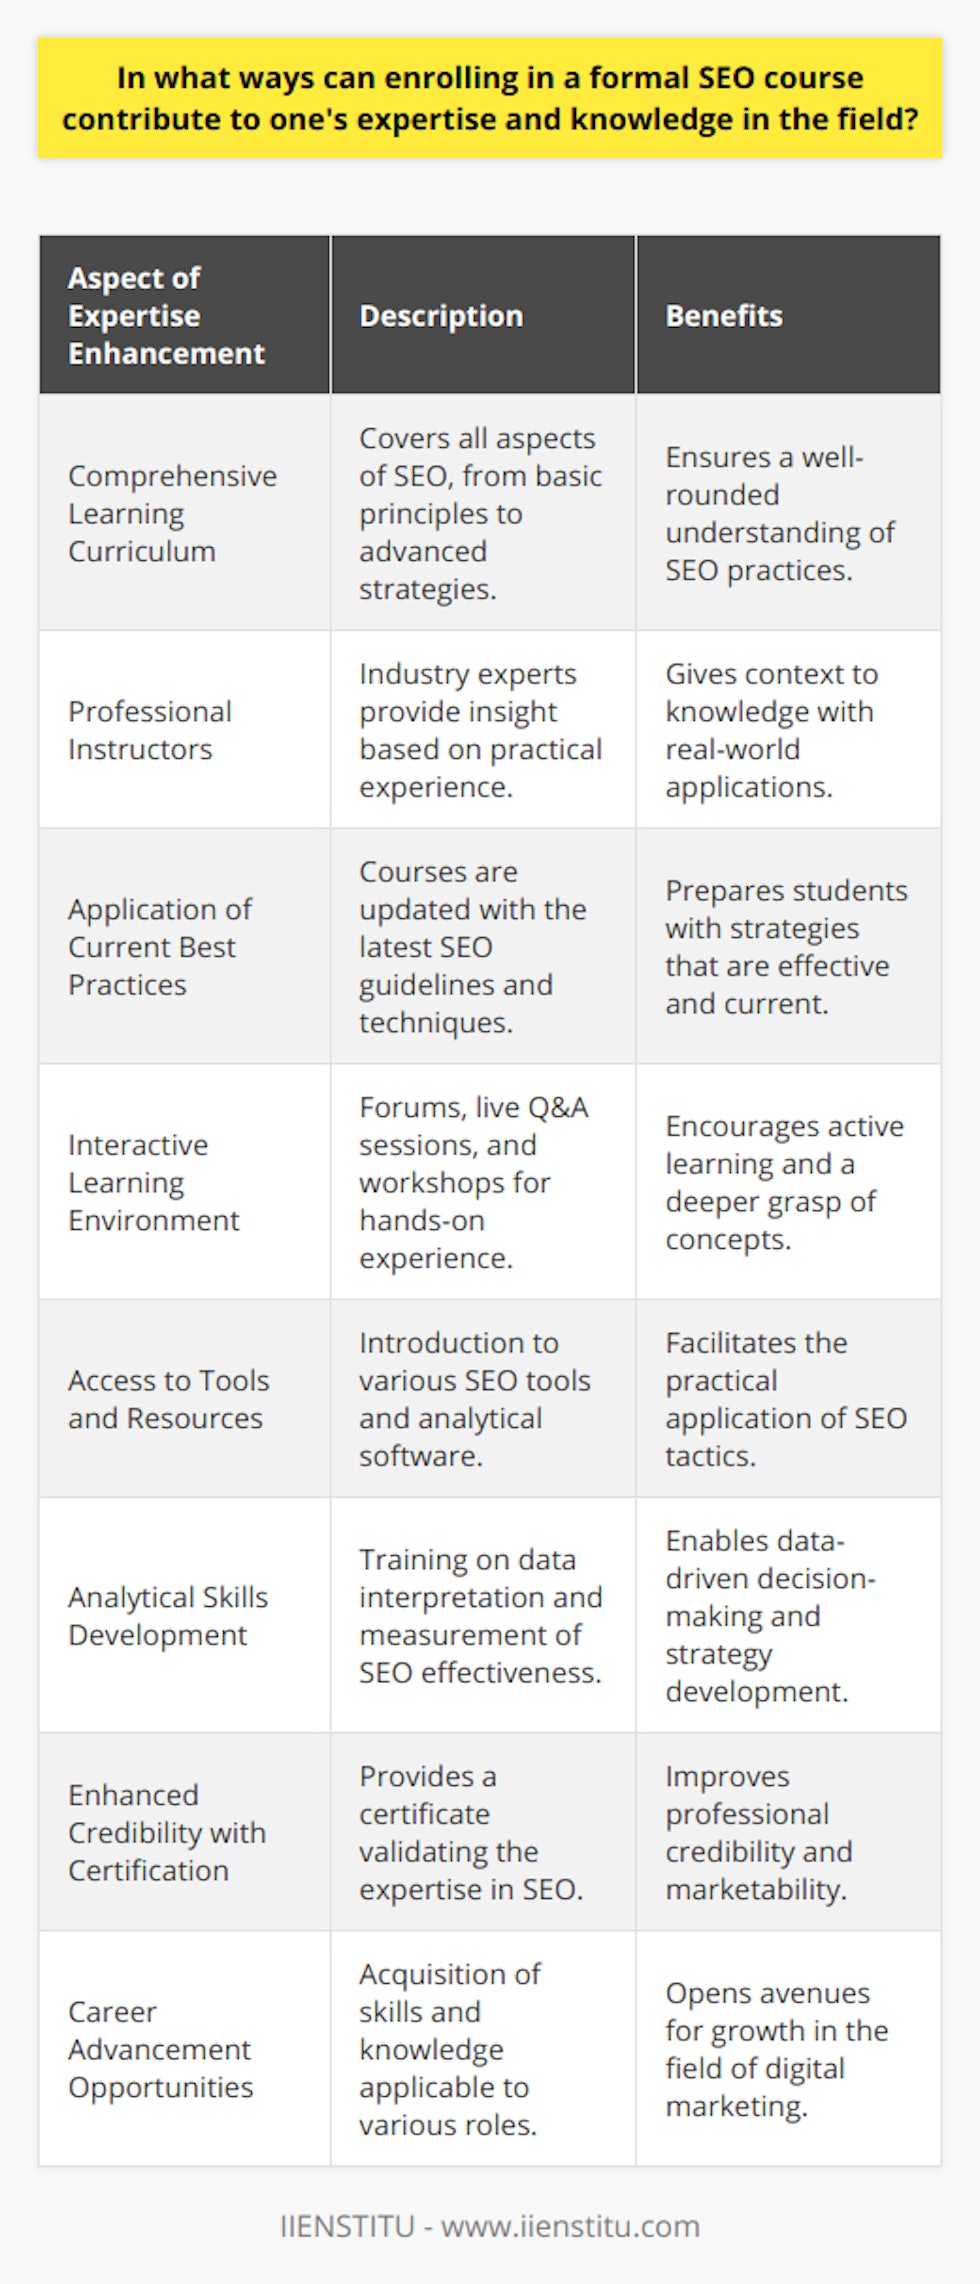 Enrolling in a formal SEO course, such as those offered by recognized institutions like IIENSTITU, can significantly enhance an individual's understanding and proficiency in search engine optimization. Here are several ways in which these courses contribute to the development of SEO expertise:Comprehensive Learning Curriculum:Formal SEO courses typically provide a curriculum that encompasses all facets of SEO, from the basics to advanced tactics. This ensures that learners grasp the multiple dimensions of SEO, including technical SEO, content strategy, user experience, and mobile optimization. The courses are designed to provide a strong foundation, making it easier for students to understand how various elements work together for successful SEO.Professional Instructors with Real-World Experience:One of the major benefits of enrolling in a formal course is access to experienced instructors who bring real-world insights into the classroom. These professionals offer valuable lessons drawn from their day-to-day experiences, sharing practical tips, common pitfalls, and innovative strategies that textbooks alone may not cover.Application of Current Best Practices:SEO is a field that changes constantly, with search engine algorithms evolving and new best practices emerging. Formal courses often integrate the latest guidelines and techniques, ensuring that students are learning strategies that are currently effective and compliant with search engine policies.Interactive Learning Environment:Interactive course elements, such as forums, live Q&A sessions, and workshops, enable students to engage with the material and ask specific, context-relevant questions. This interactive setting encourages active learning and helps to solidify understanding as concepts are discussed and applied in a collaborative manner.Access to Tools and Resources:Many formal SEO courses provide learners with access to various industry tools and resources. This may include software for keyword analysis, backlink evaluation, or analytics monitoring. Learning how to effectively utilize these tools can give students an edge in implementing and managing SEO campaigns.Analytical Skills Development:SEO requires a keen analytical eye to interpret data and make informed decisions about strategy. Formal courses often include modules on how to analyze website traffic, understand user behavior, and measure the effectiveness of SEO efforts. This makes students adept at turning data into actionable insights.Enhancing Credibility with Certification:Upon completion of a course, students may receive a certification that validates their expertise. This formal recognition can enhance a professional's credibility in the field, making them more attractive to employers or clients who seek qualified individuals with proven knowledge and skills in SEO.Career Advancement:The knowledge and skills gained from a formal SEO course can open doors for career advancement. Whether it's transitioning to a role that specializes in SEO or improving the performance of one's own business or blog, the expertise acquired through formal education can be a significant asset.In summary, enrolling in a formal SEO course can have a profound impact on an individual's expertise and knowledge in the field. It offers a structured educational experience that combines theory with practical application, guided by professionals, and equips students with the contemporary skills needed to succeed in the dynamic world of SEO.